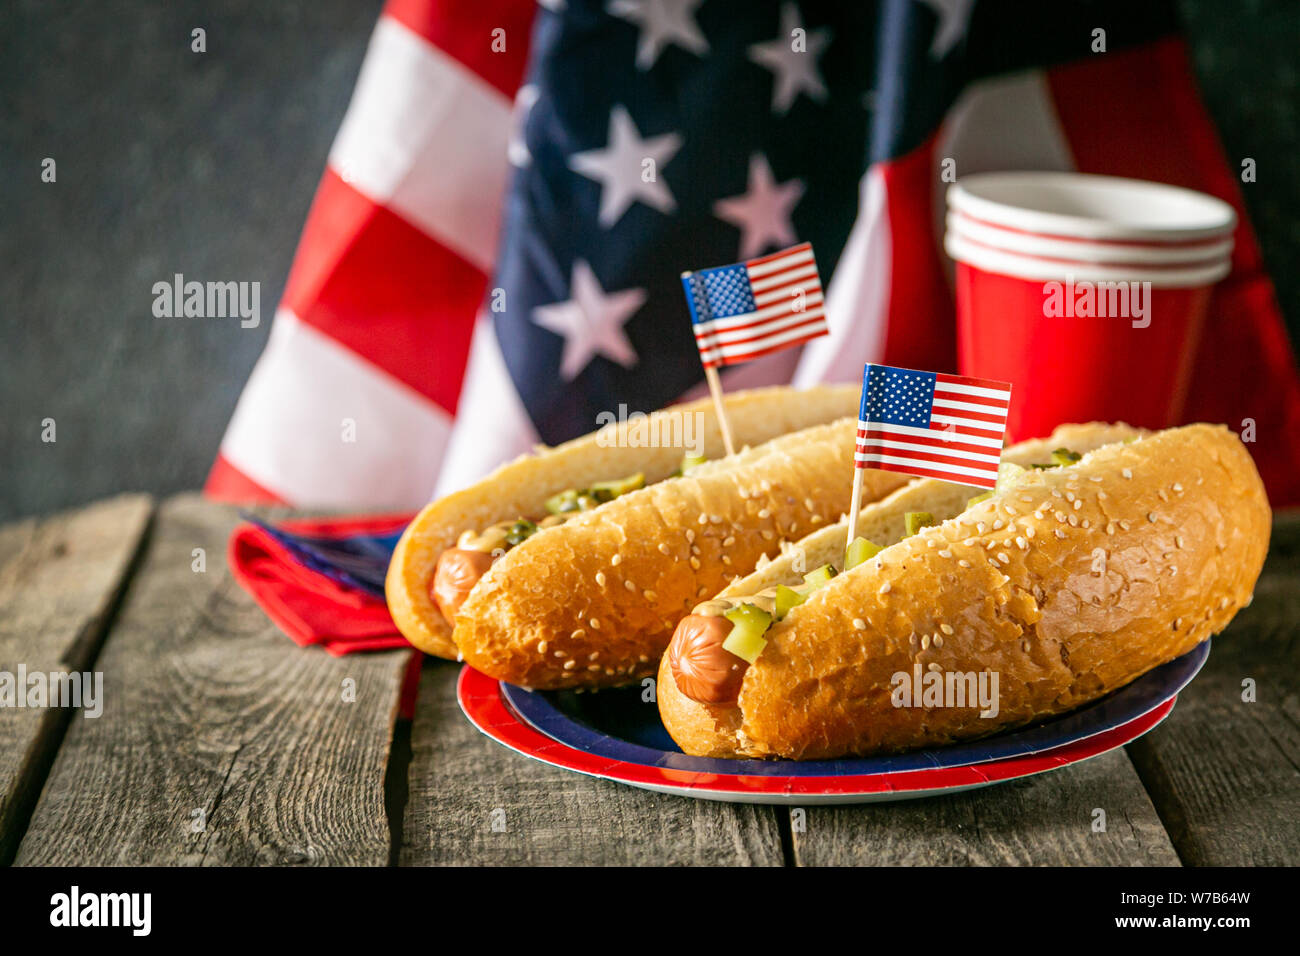 USA national holiday Labor Day, Memorial Day, Flag Day, 4th of July - hot dogs with ketchup and mustard on wood background Stock Photo